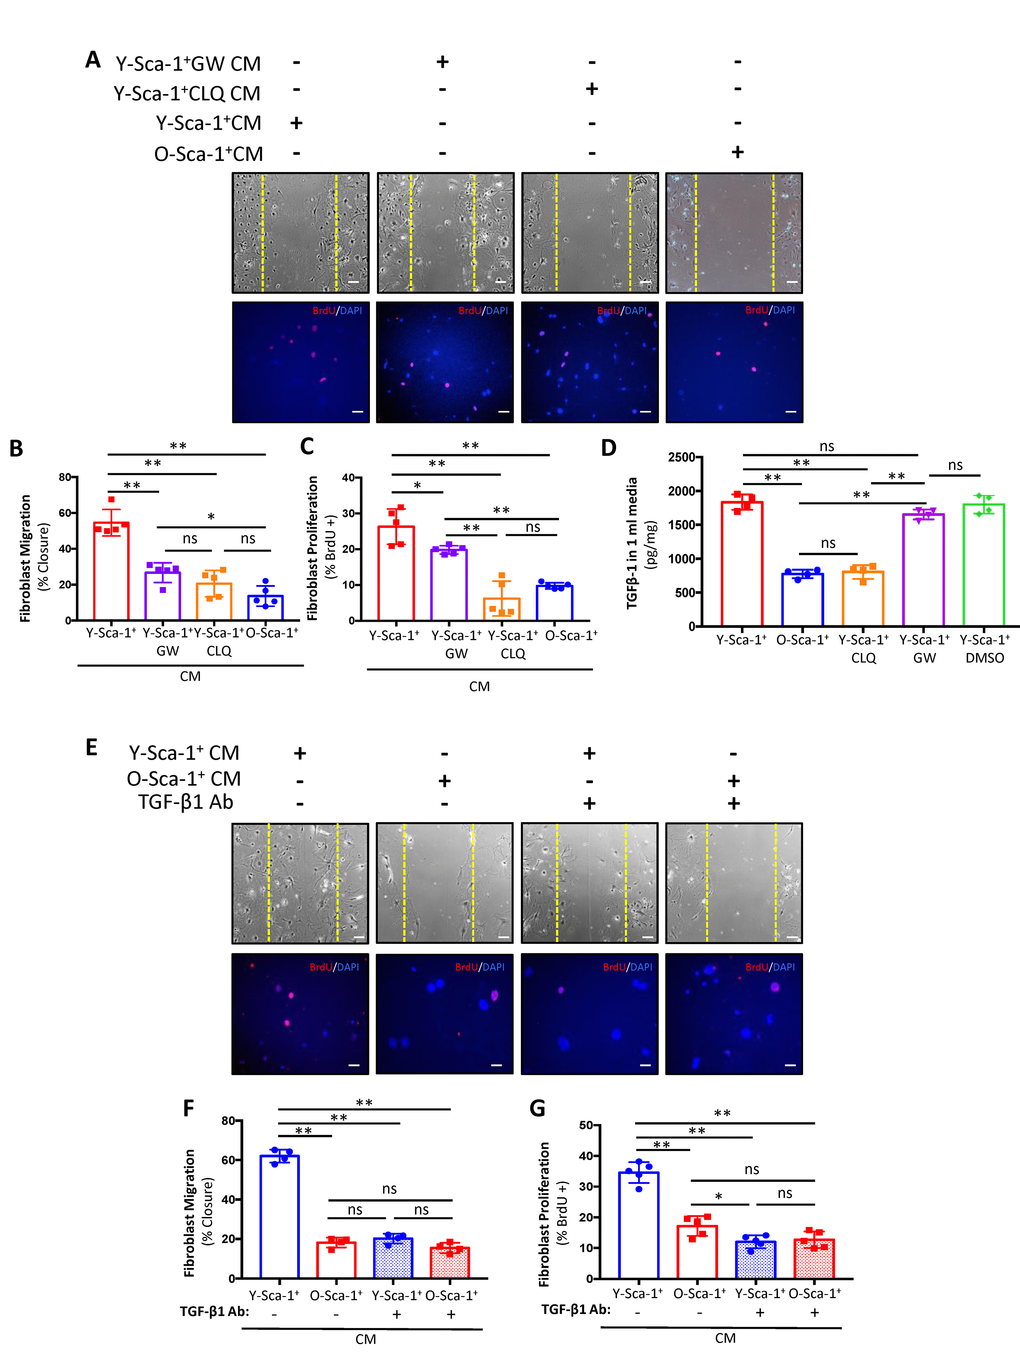 Y-Sca-1+ BMCs enhance old cardiac fibroblast function via autophagy-dependent TGF-β1 secretion. (A) Y-Sca-1+ bone marrow cells (BMCs) were treated with pharmacological inhibitors of autophagy (chloroquine, CLQ) and extracellular vesicle (EV) secretion (via GW4869). Conditioned medium (CM) was then collected and added to cultured cardiac fibroblasts isolated from old mice. Treatments are abbreviated as: Y-Sca-1+ CM±CLQ, Y-Sca-1+ CM±GW4869 or O-Sca-1+ CM. Representative images from scratch wound and proliferation assays after old cardiac fibroblasts were treated with CM from Y-Sca-1+ CM±CLQ, ±GW4869 and O-Sca-1+ CM for 48, or 24 hours, respectively. (B) Percent wound closure (after completing the scratch wound assay) was measured using ImageJ. Dashed yellow line indicates the wound edge at 0 hours. (C) Percentage of BrdU+ cells, normalized to total cell number. (D) TGF-β1 levels were measured in CM using ELISA. (E) Representative images from scratch wound and proliferation assays after old fibroblasts were treated with CM in the presence of TGF-β1 blocking antibody (Ab) for 48 hours. Treatment groups are abbreviated as: Y-Sca-1+ CM± TGF-β1 Ab and O-Sca-1+ CM± TGF-β1 Ab. Dashed yellow line indicates the wound edge at 0 hours. (F) Percent wound closure (after completing the scratch wound assay) was measured using ImageJ. (G) Percentage of BrdU+ cells, normalized to total cell number. Scale bars represent 100 μm. One-way ANOVA used to analyze data. n=3-4 *p≤0.05; **p≤0.01; ns: not statistically significant.